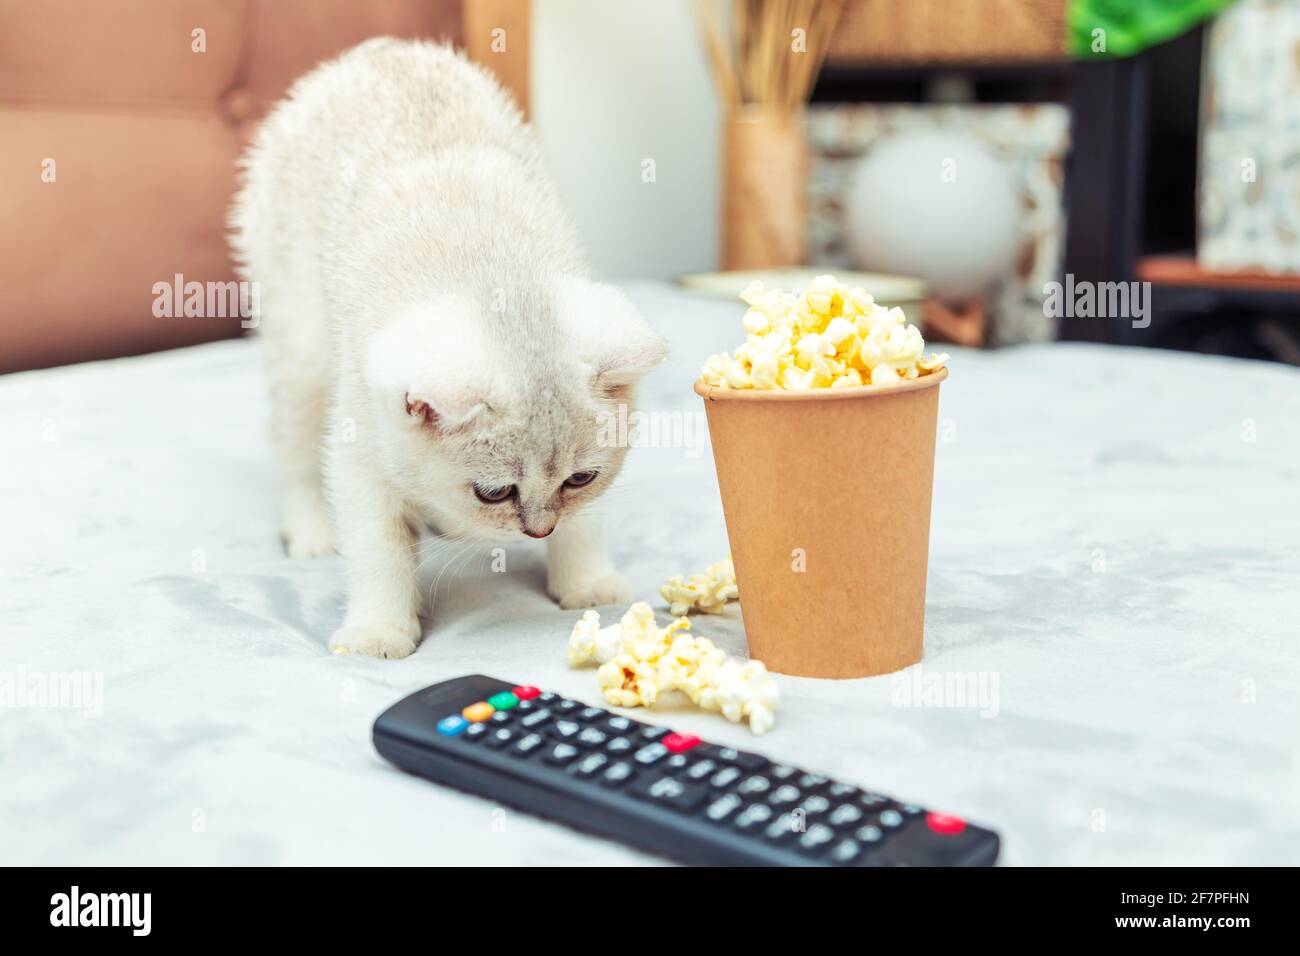 White British kitten lies on the bed with a remote control and popcorn. Classic movie viewing. Stock Photo